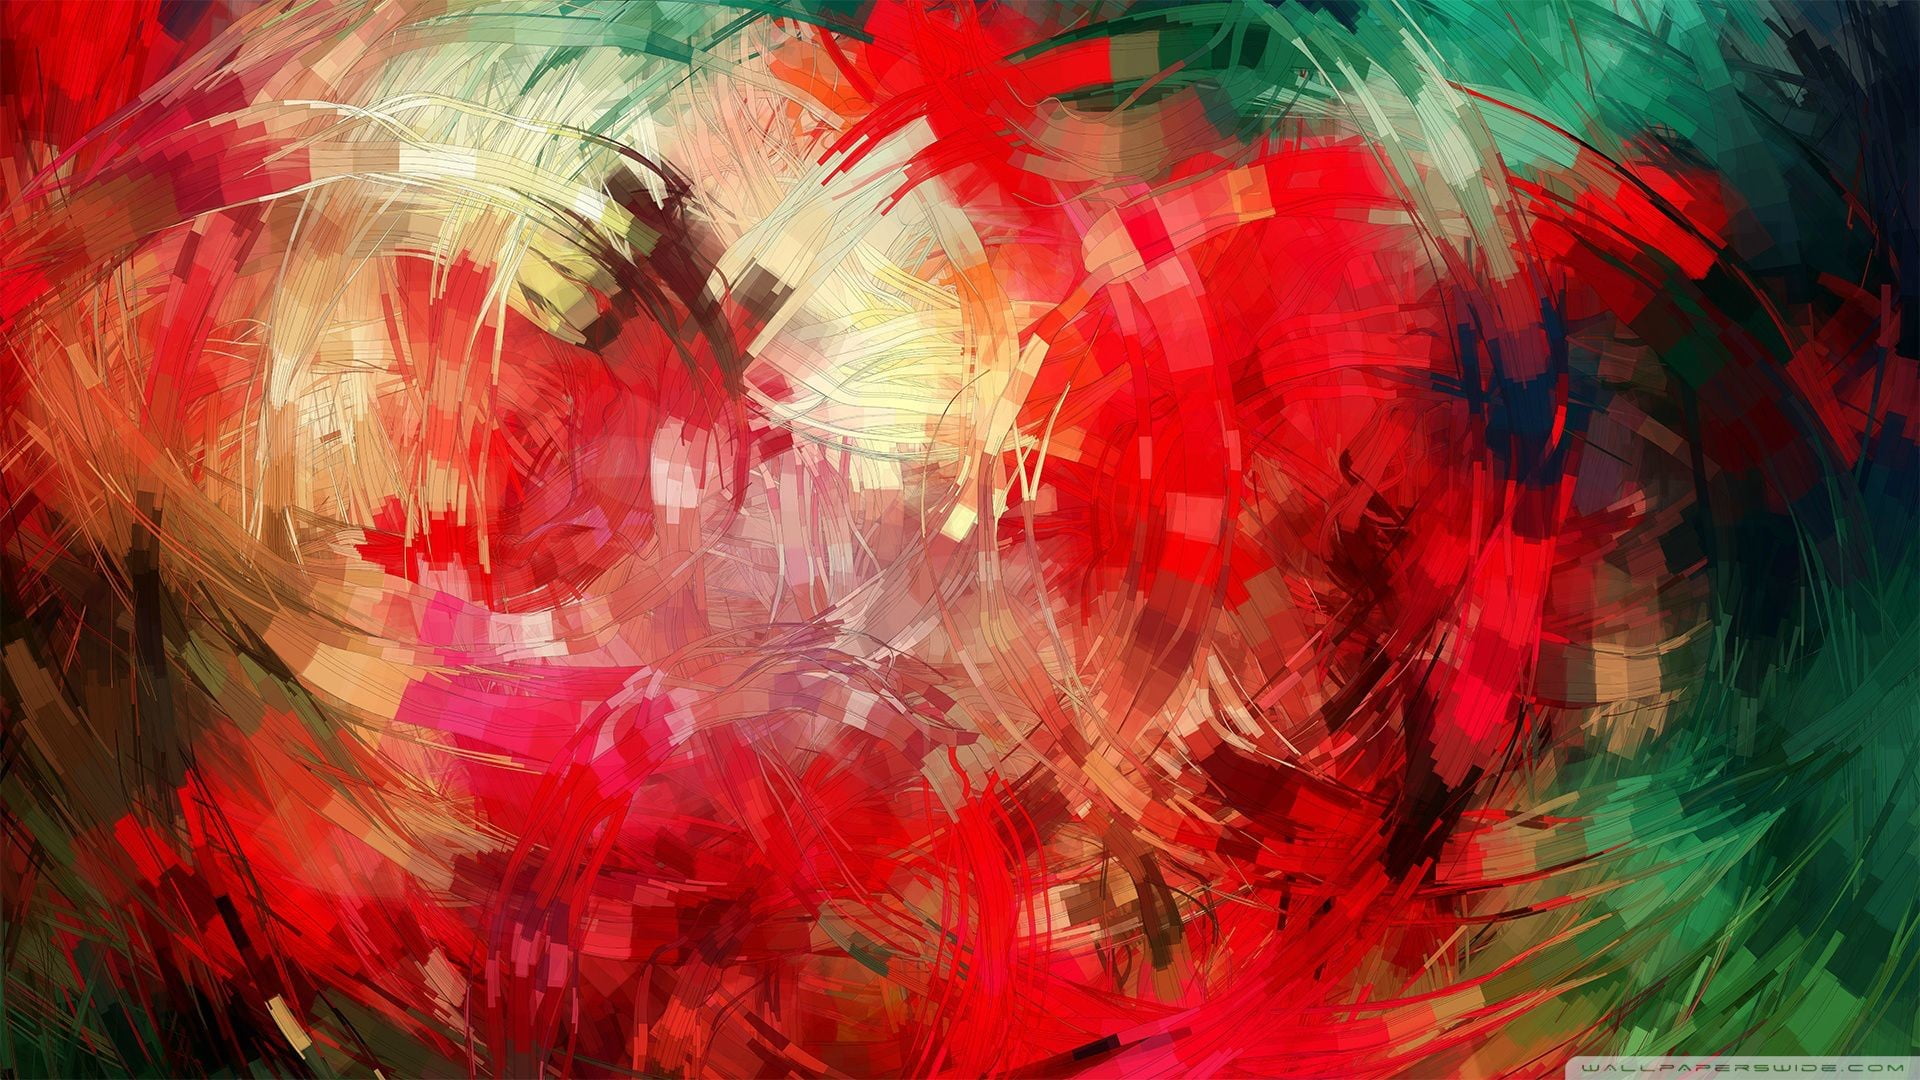 1080x1812 resolution | abstract art, painting, digital art, colorful ...